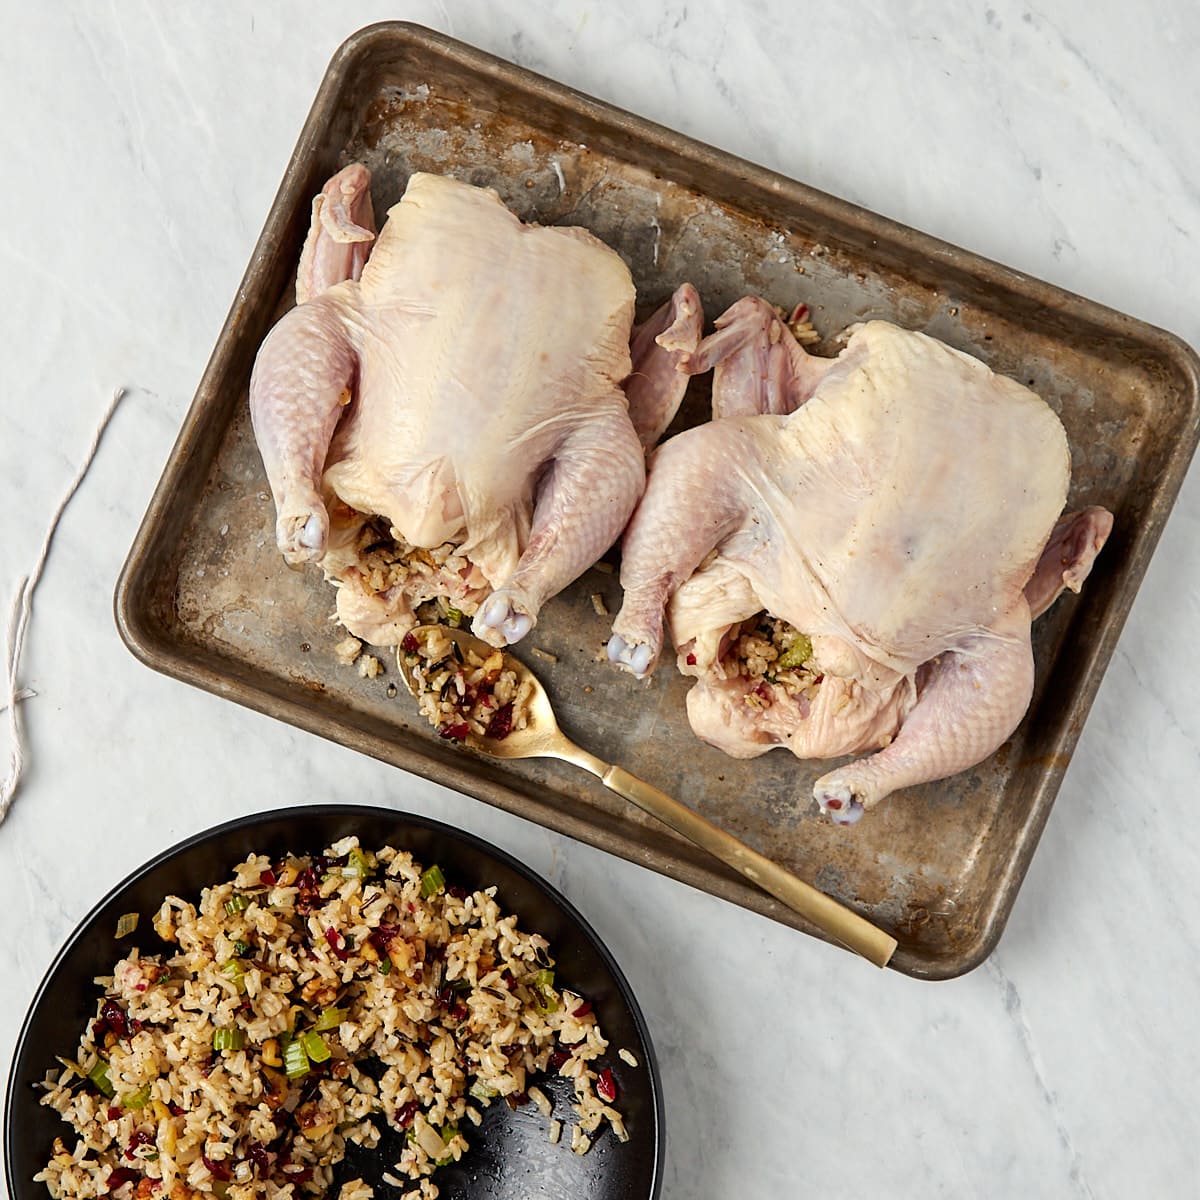 cornish game hens on a baking sheet being stuffed with wild rice stuffing.